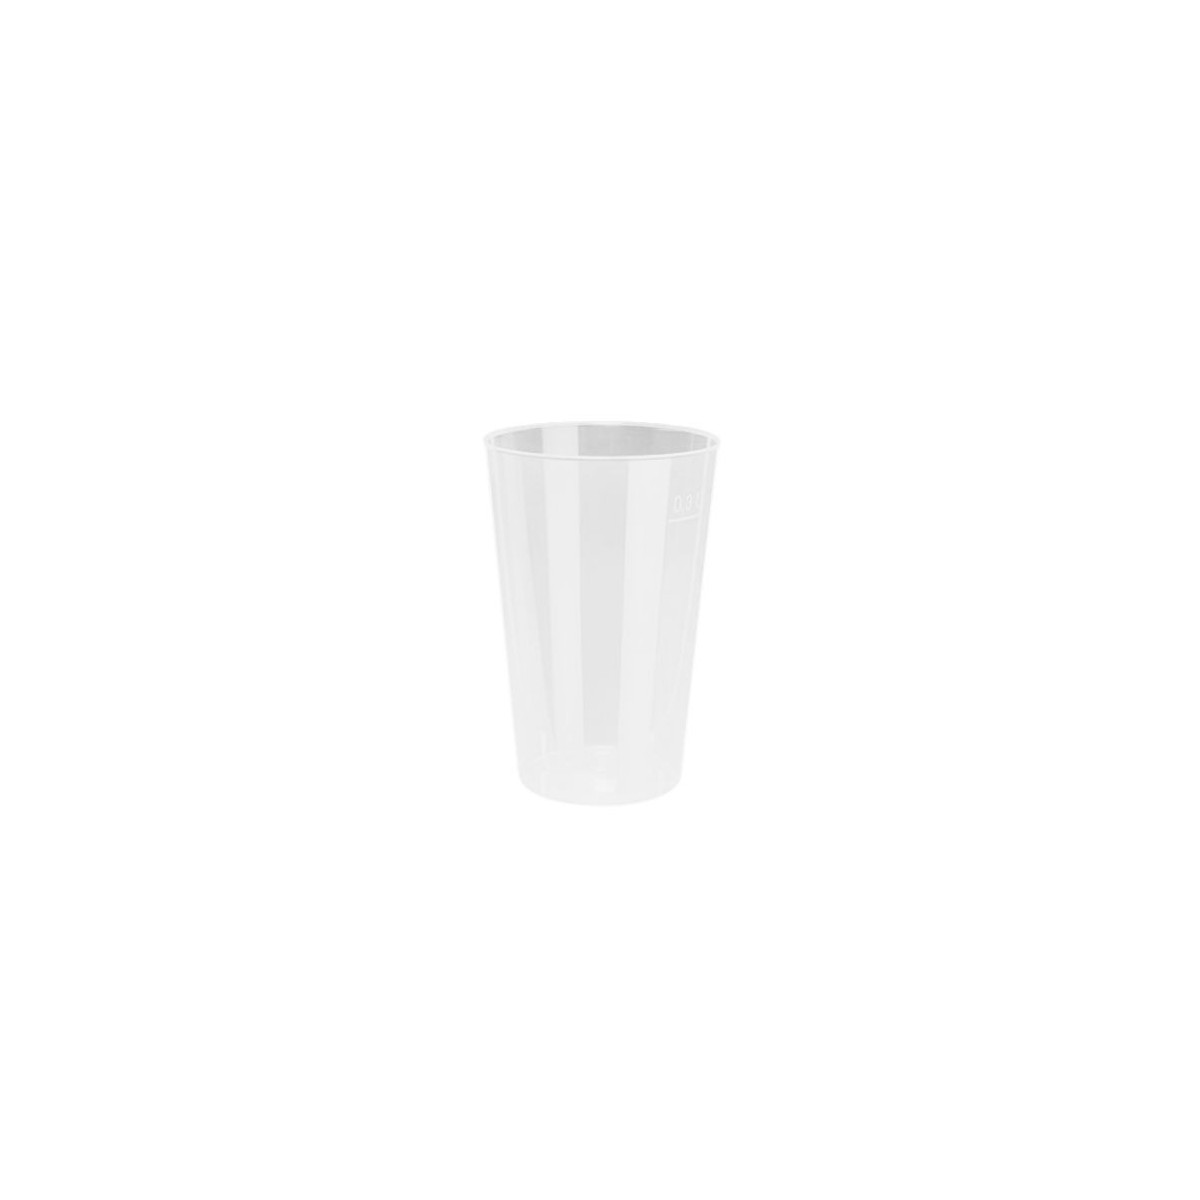 PP CLEAR REUSABLE DRINKING GLASS 7,9X11,9CM 300ML 25PCS